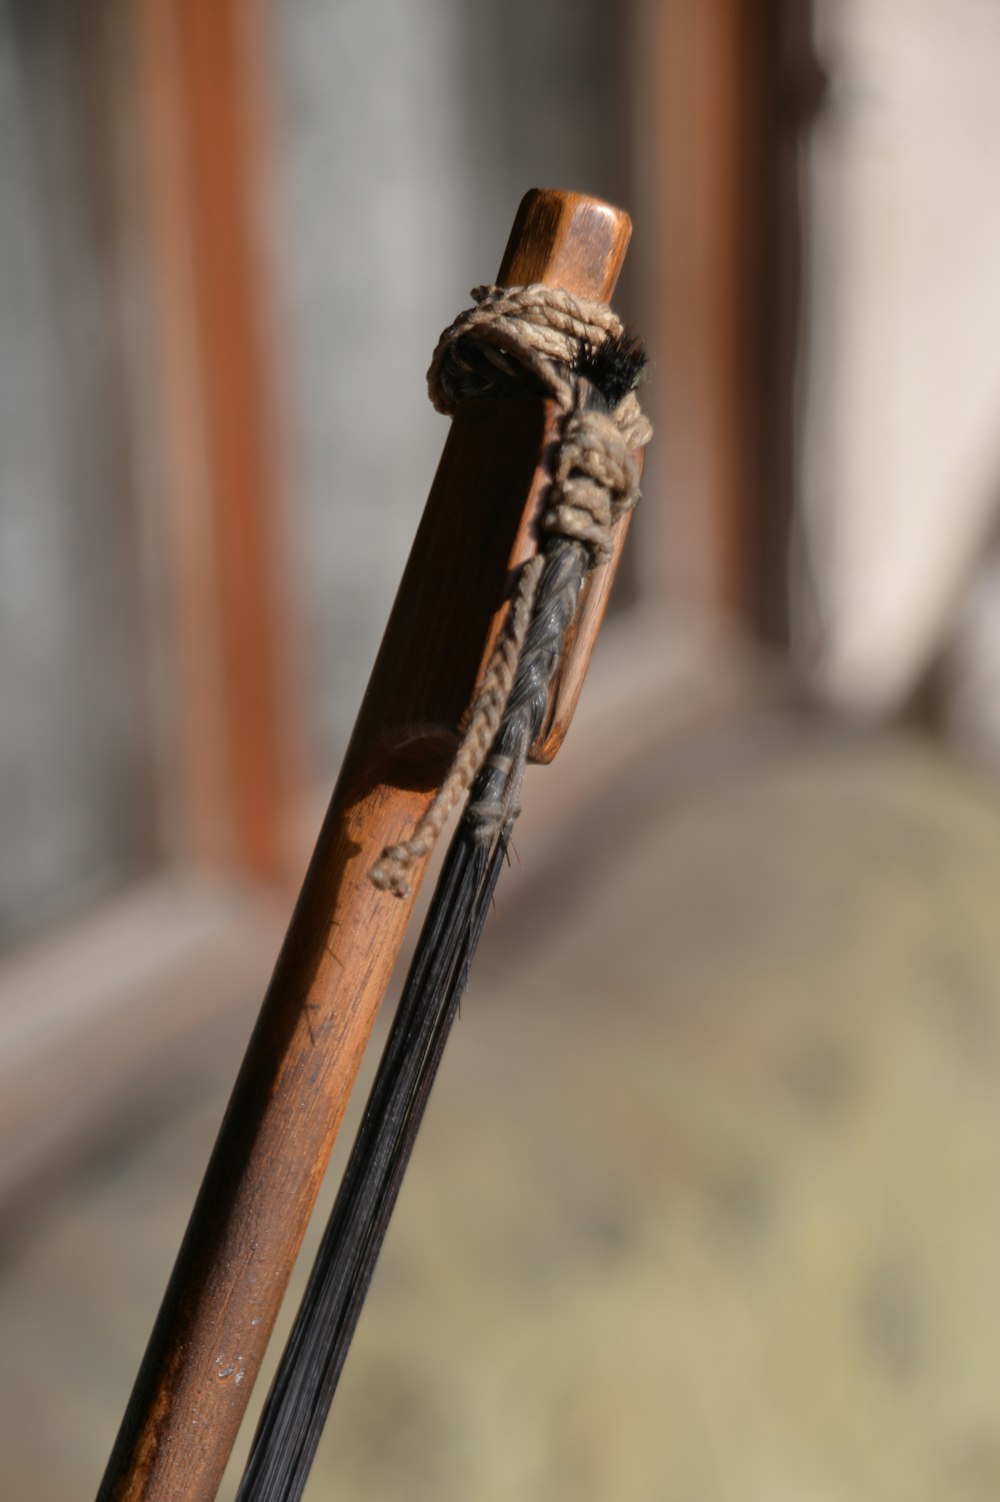 a close up of a wooden stick with a rope on it